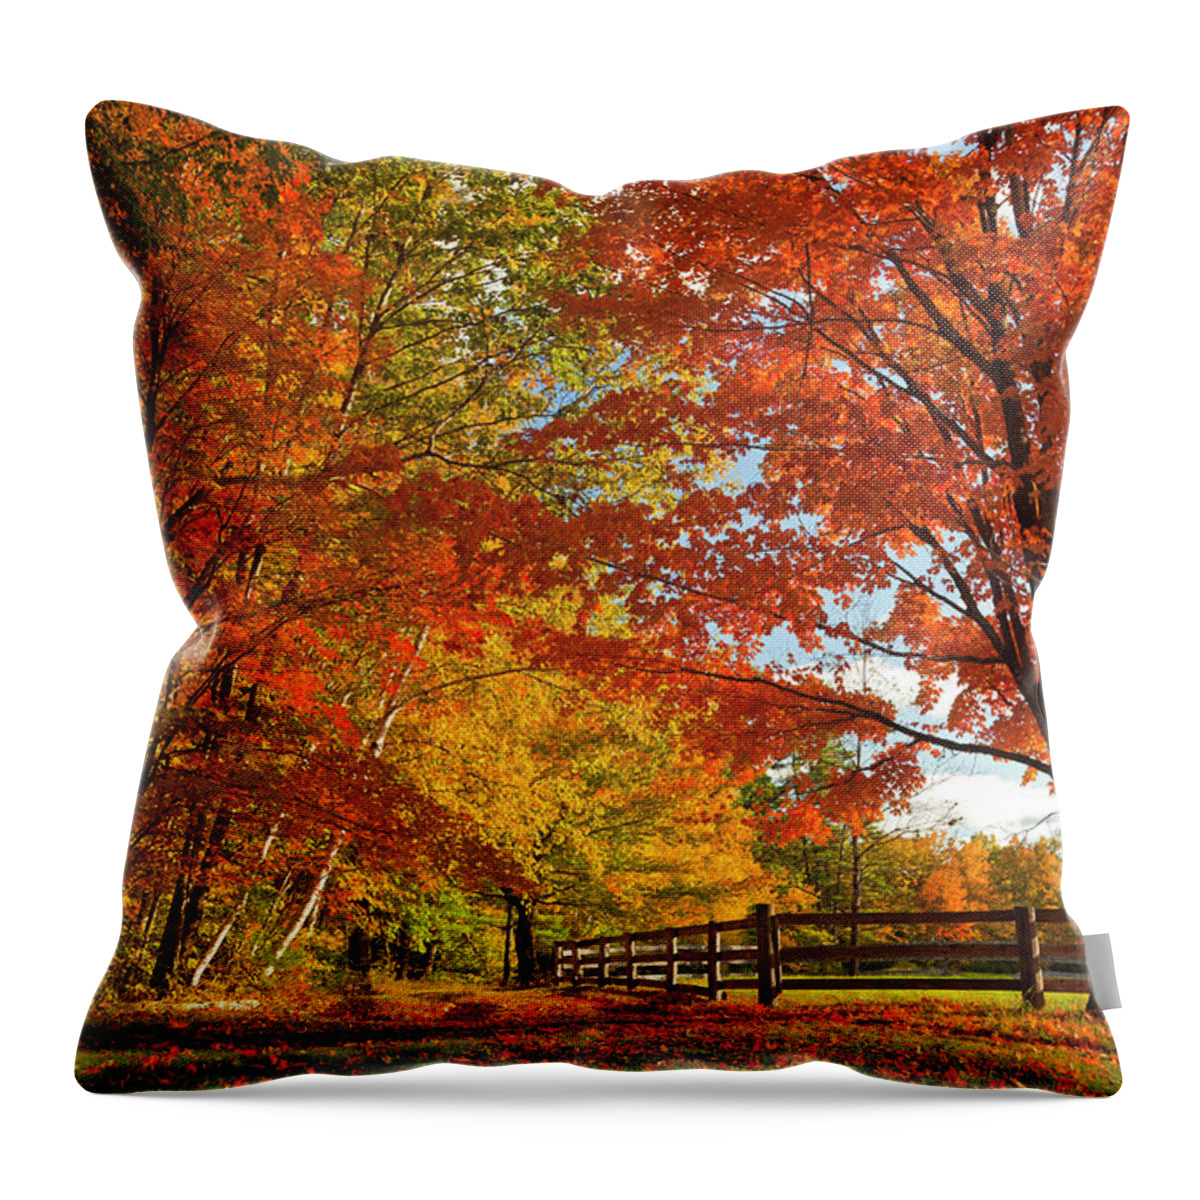 Estock Throw Pillow featuring the digital art Autumn Near Conway, New Hampshire by Claudia Uripos